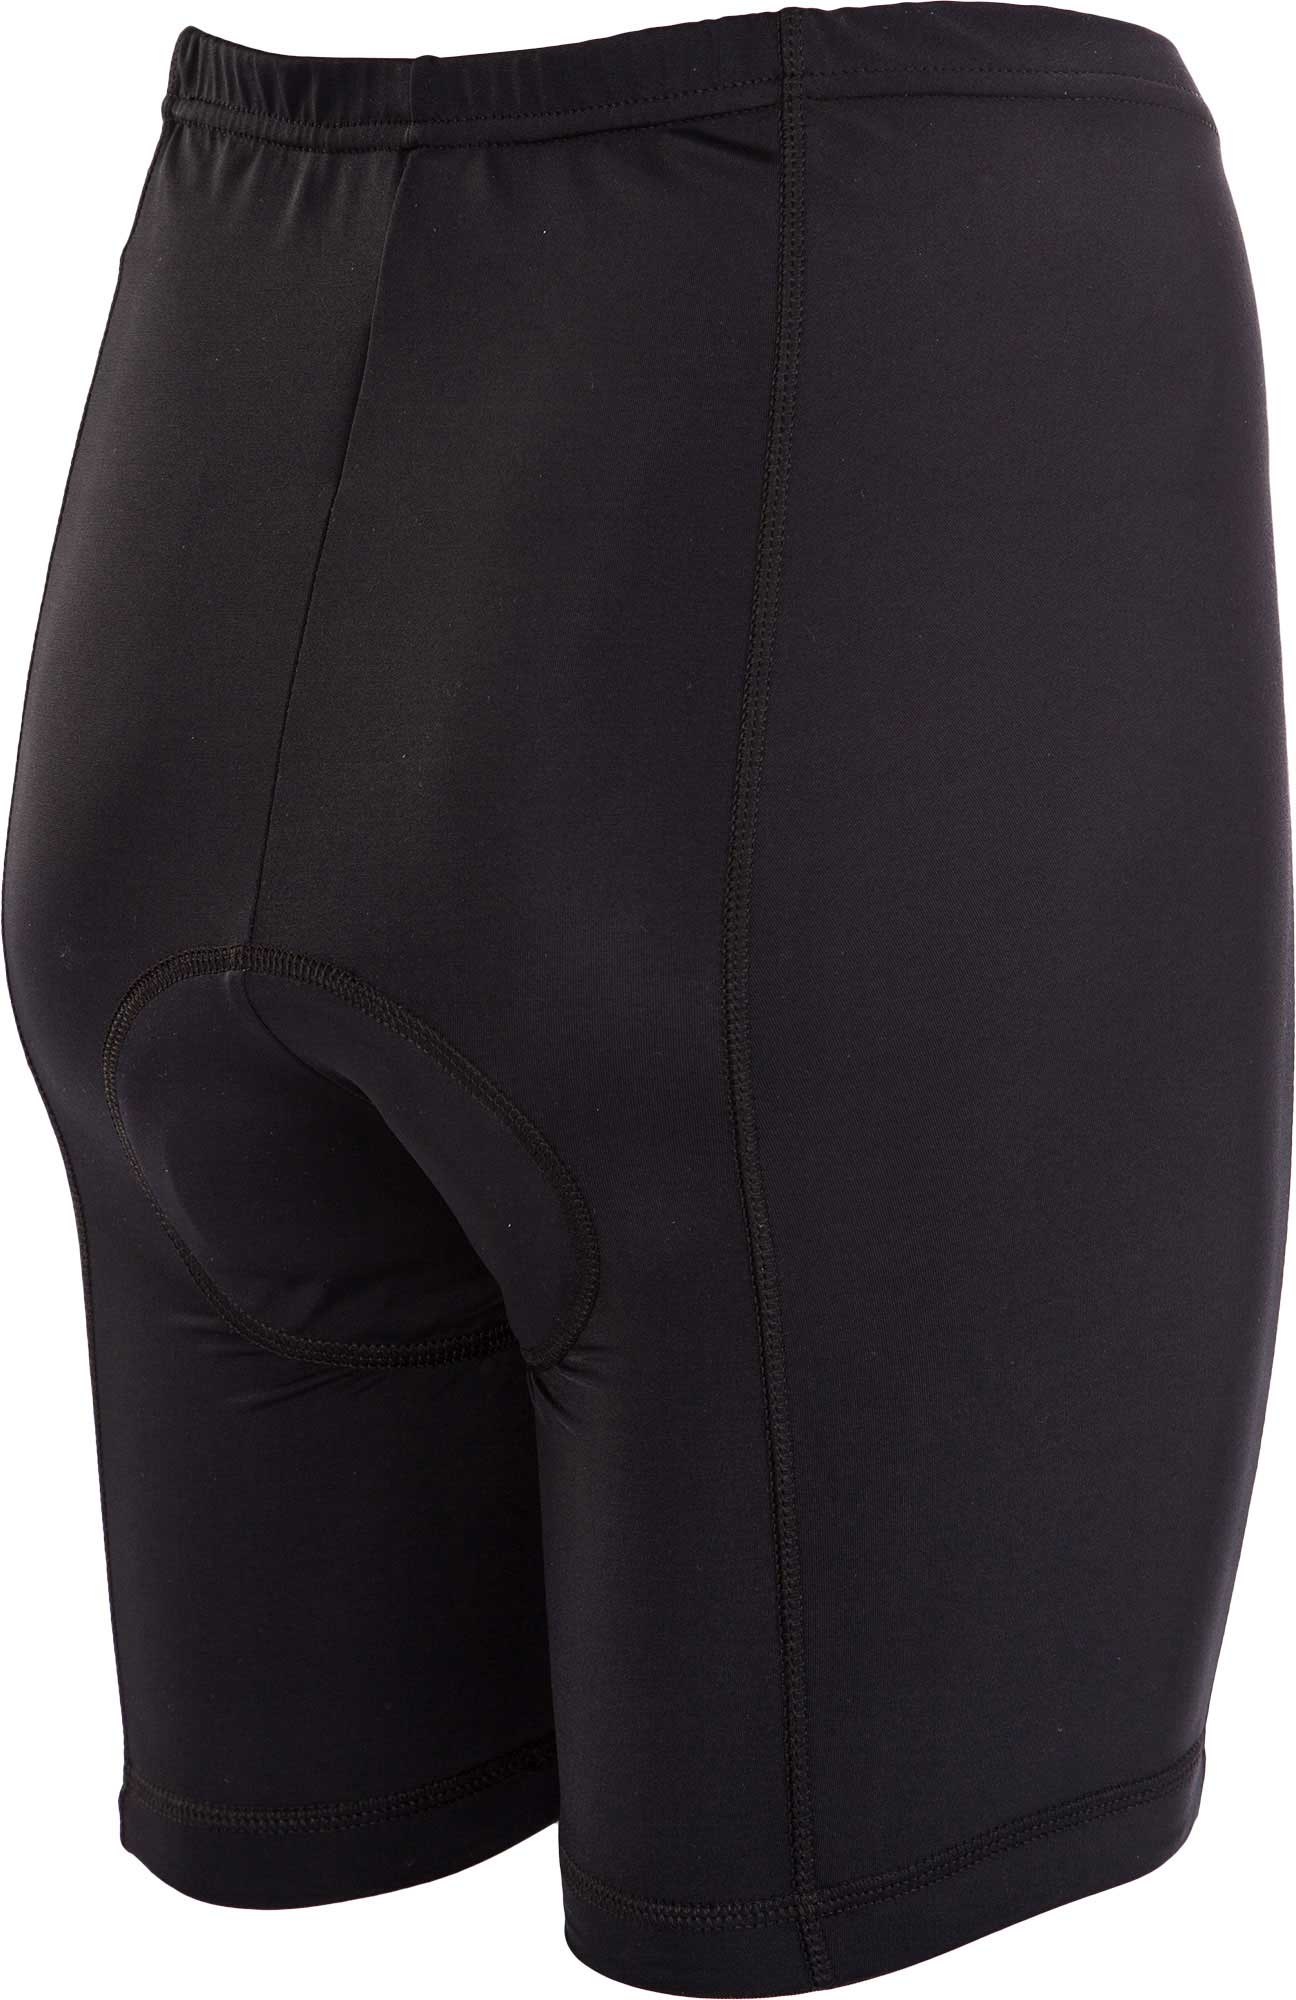 Women's cycling tights